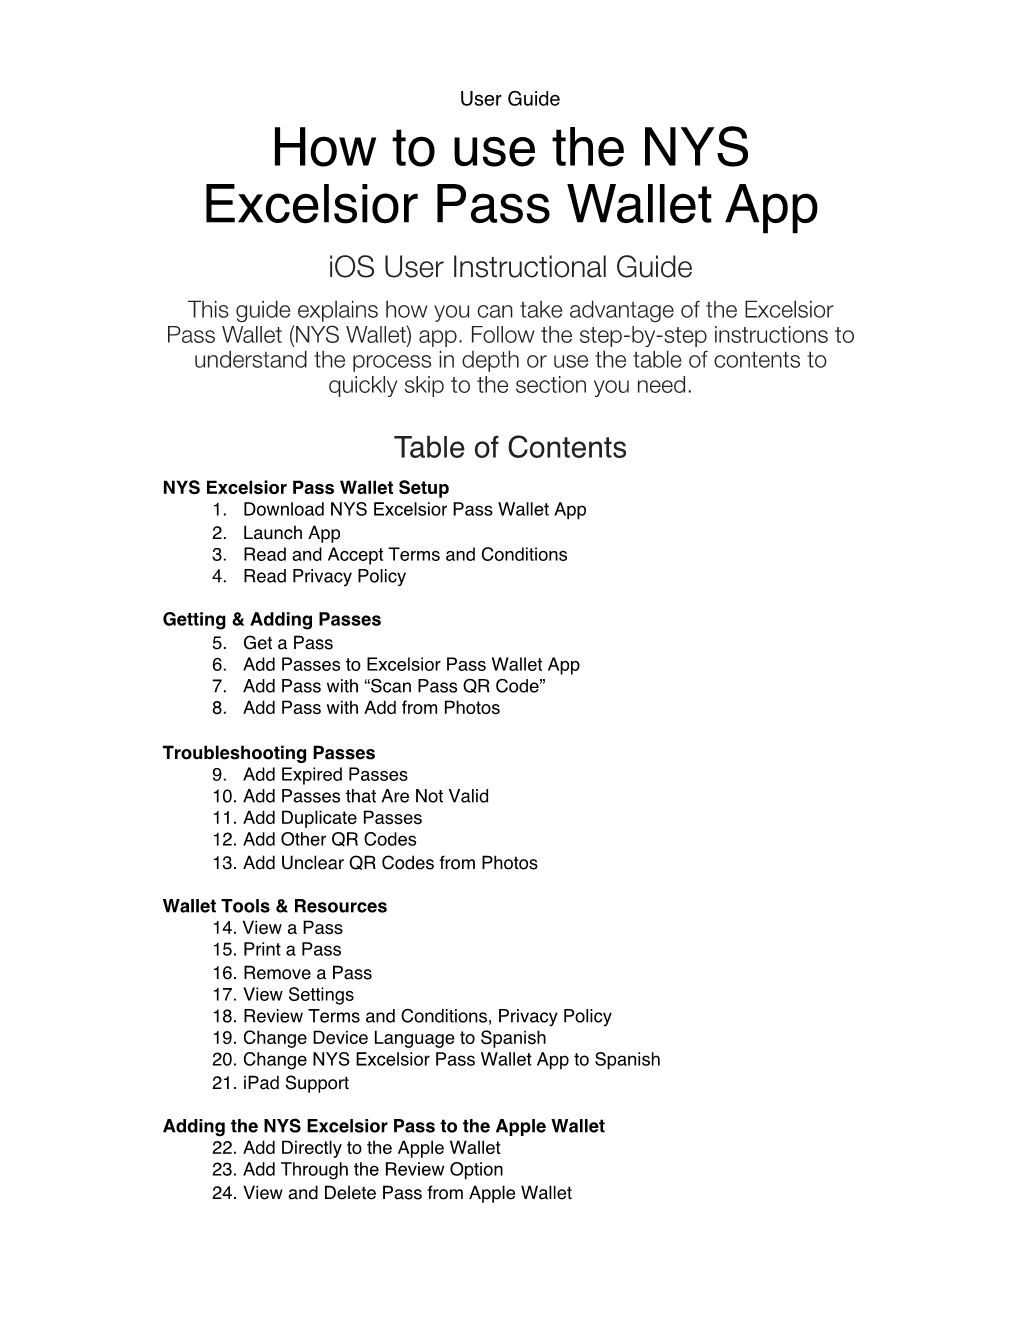 How to Use the NYS Excelsior Pass Wallet App Ios User Instructional Guide This Guide Explains How You Can Take Advantage of the Excelsior Pass Wallet (NYS Wallet) App